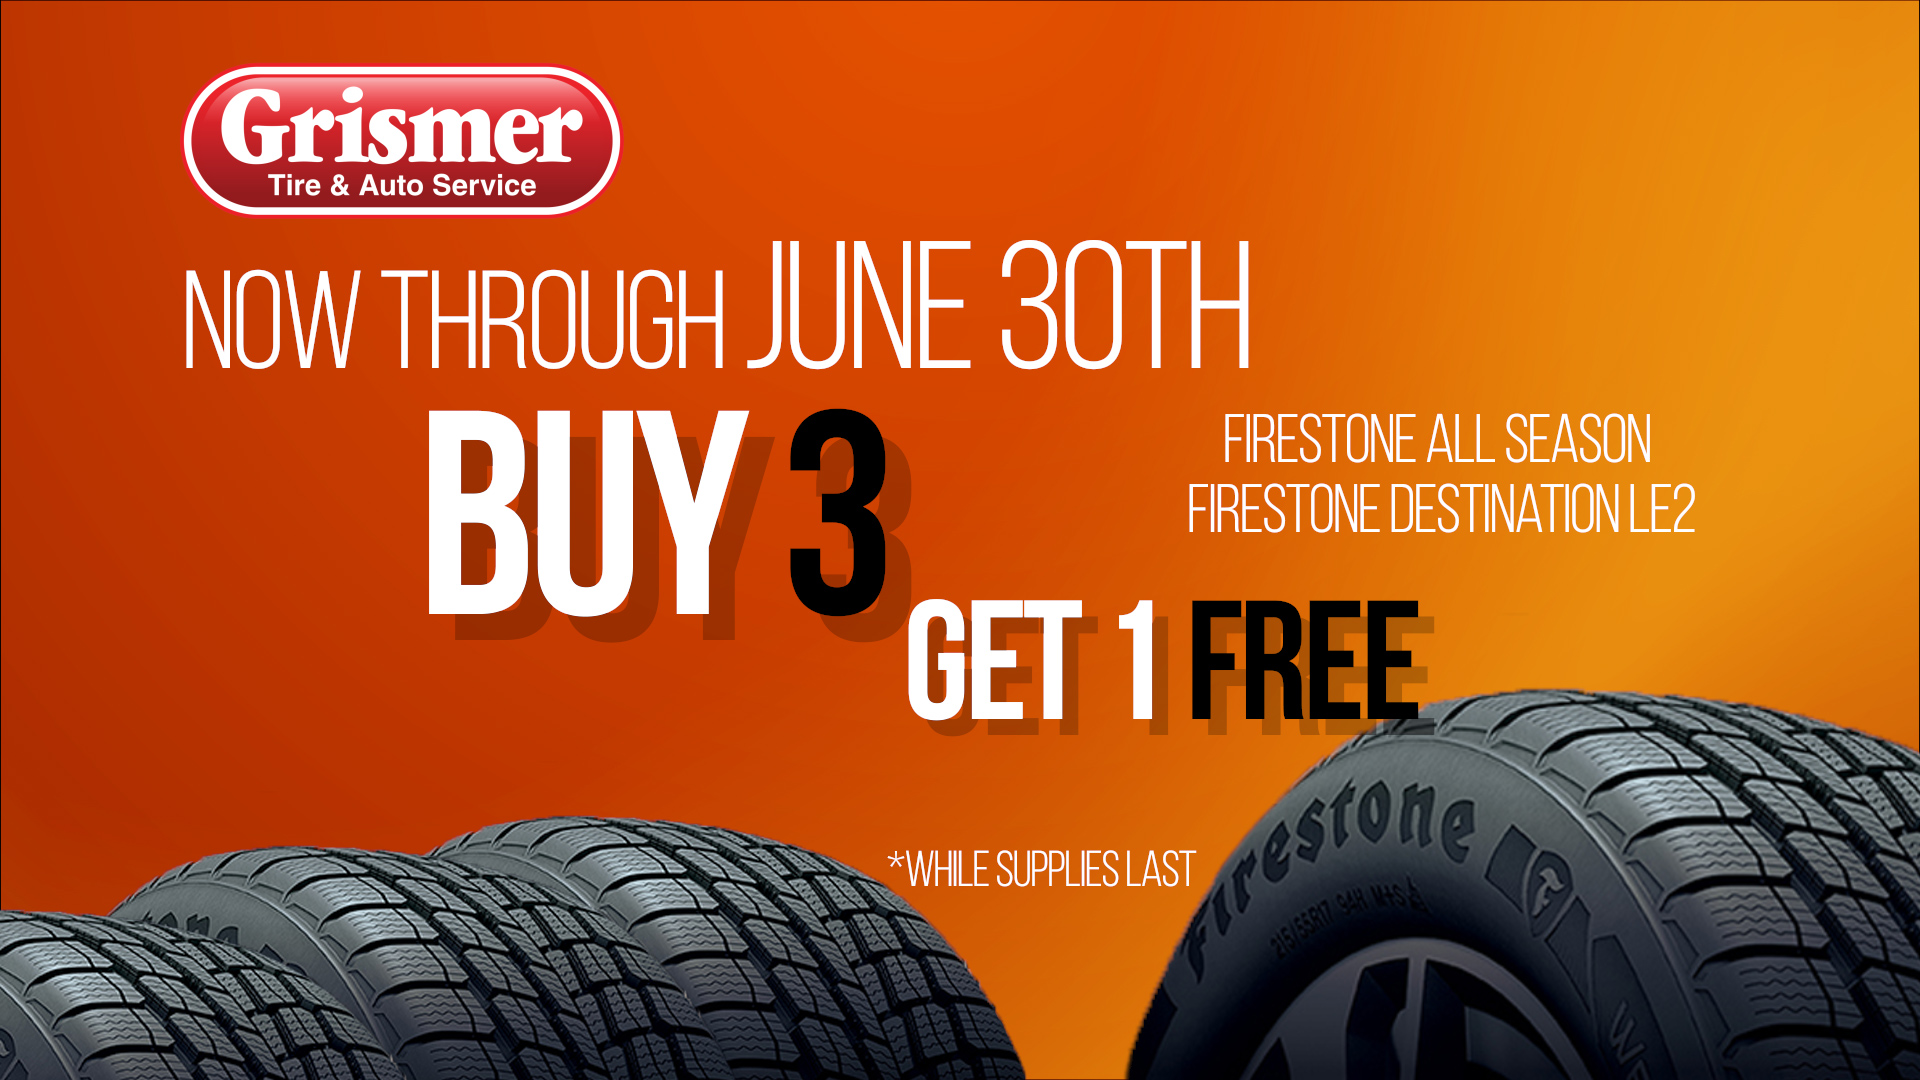 Ready for new tires? Buy 3 tires get 1 FREE!